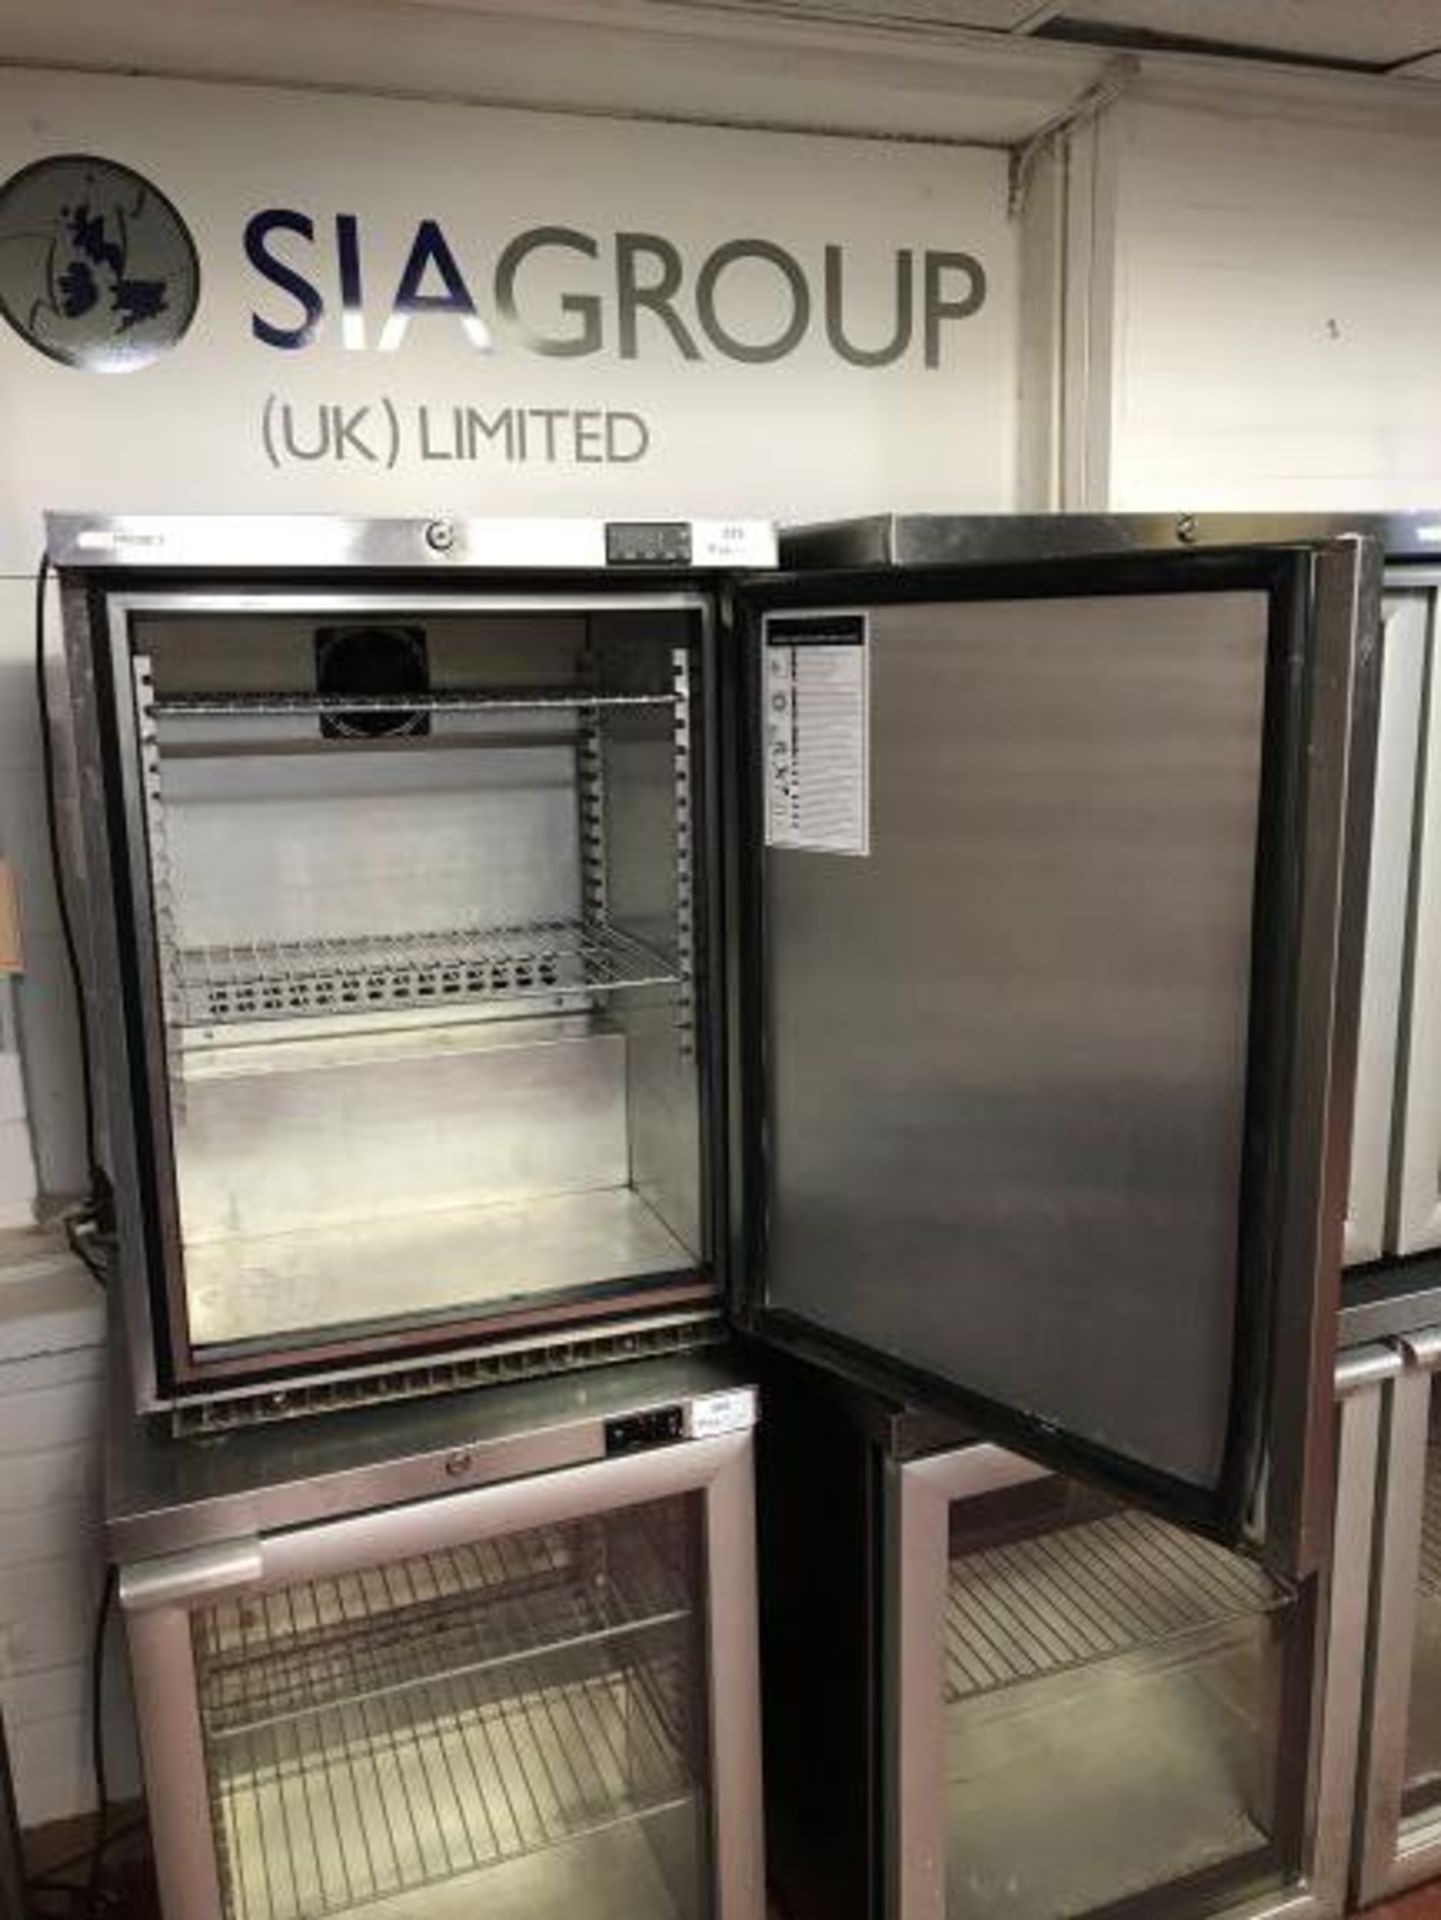 Foster Refrigeration HR150-A stainless steel single door under counter refrigerator - Image 2 of 3